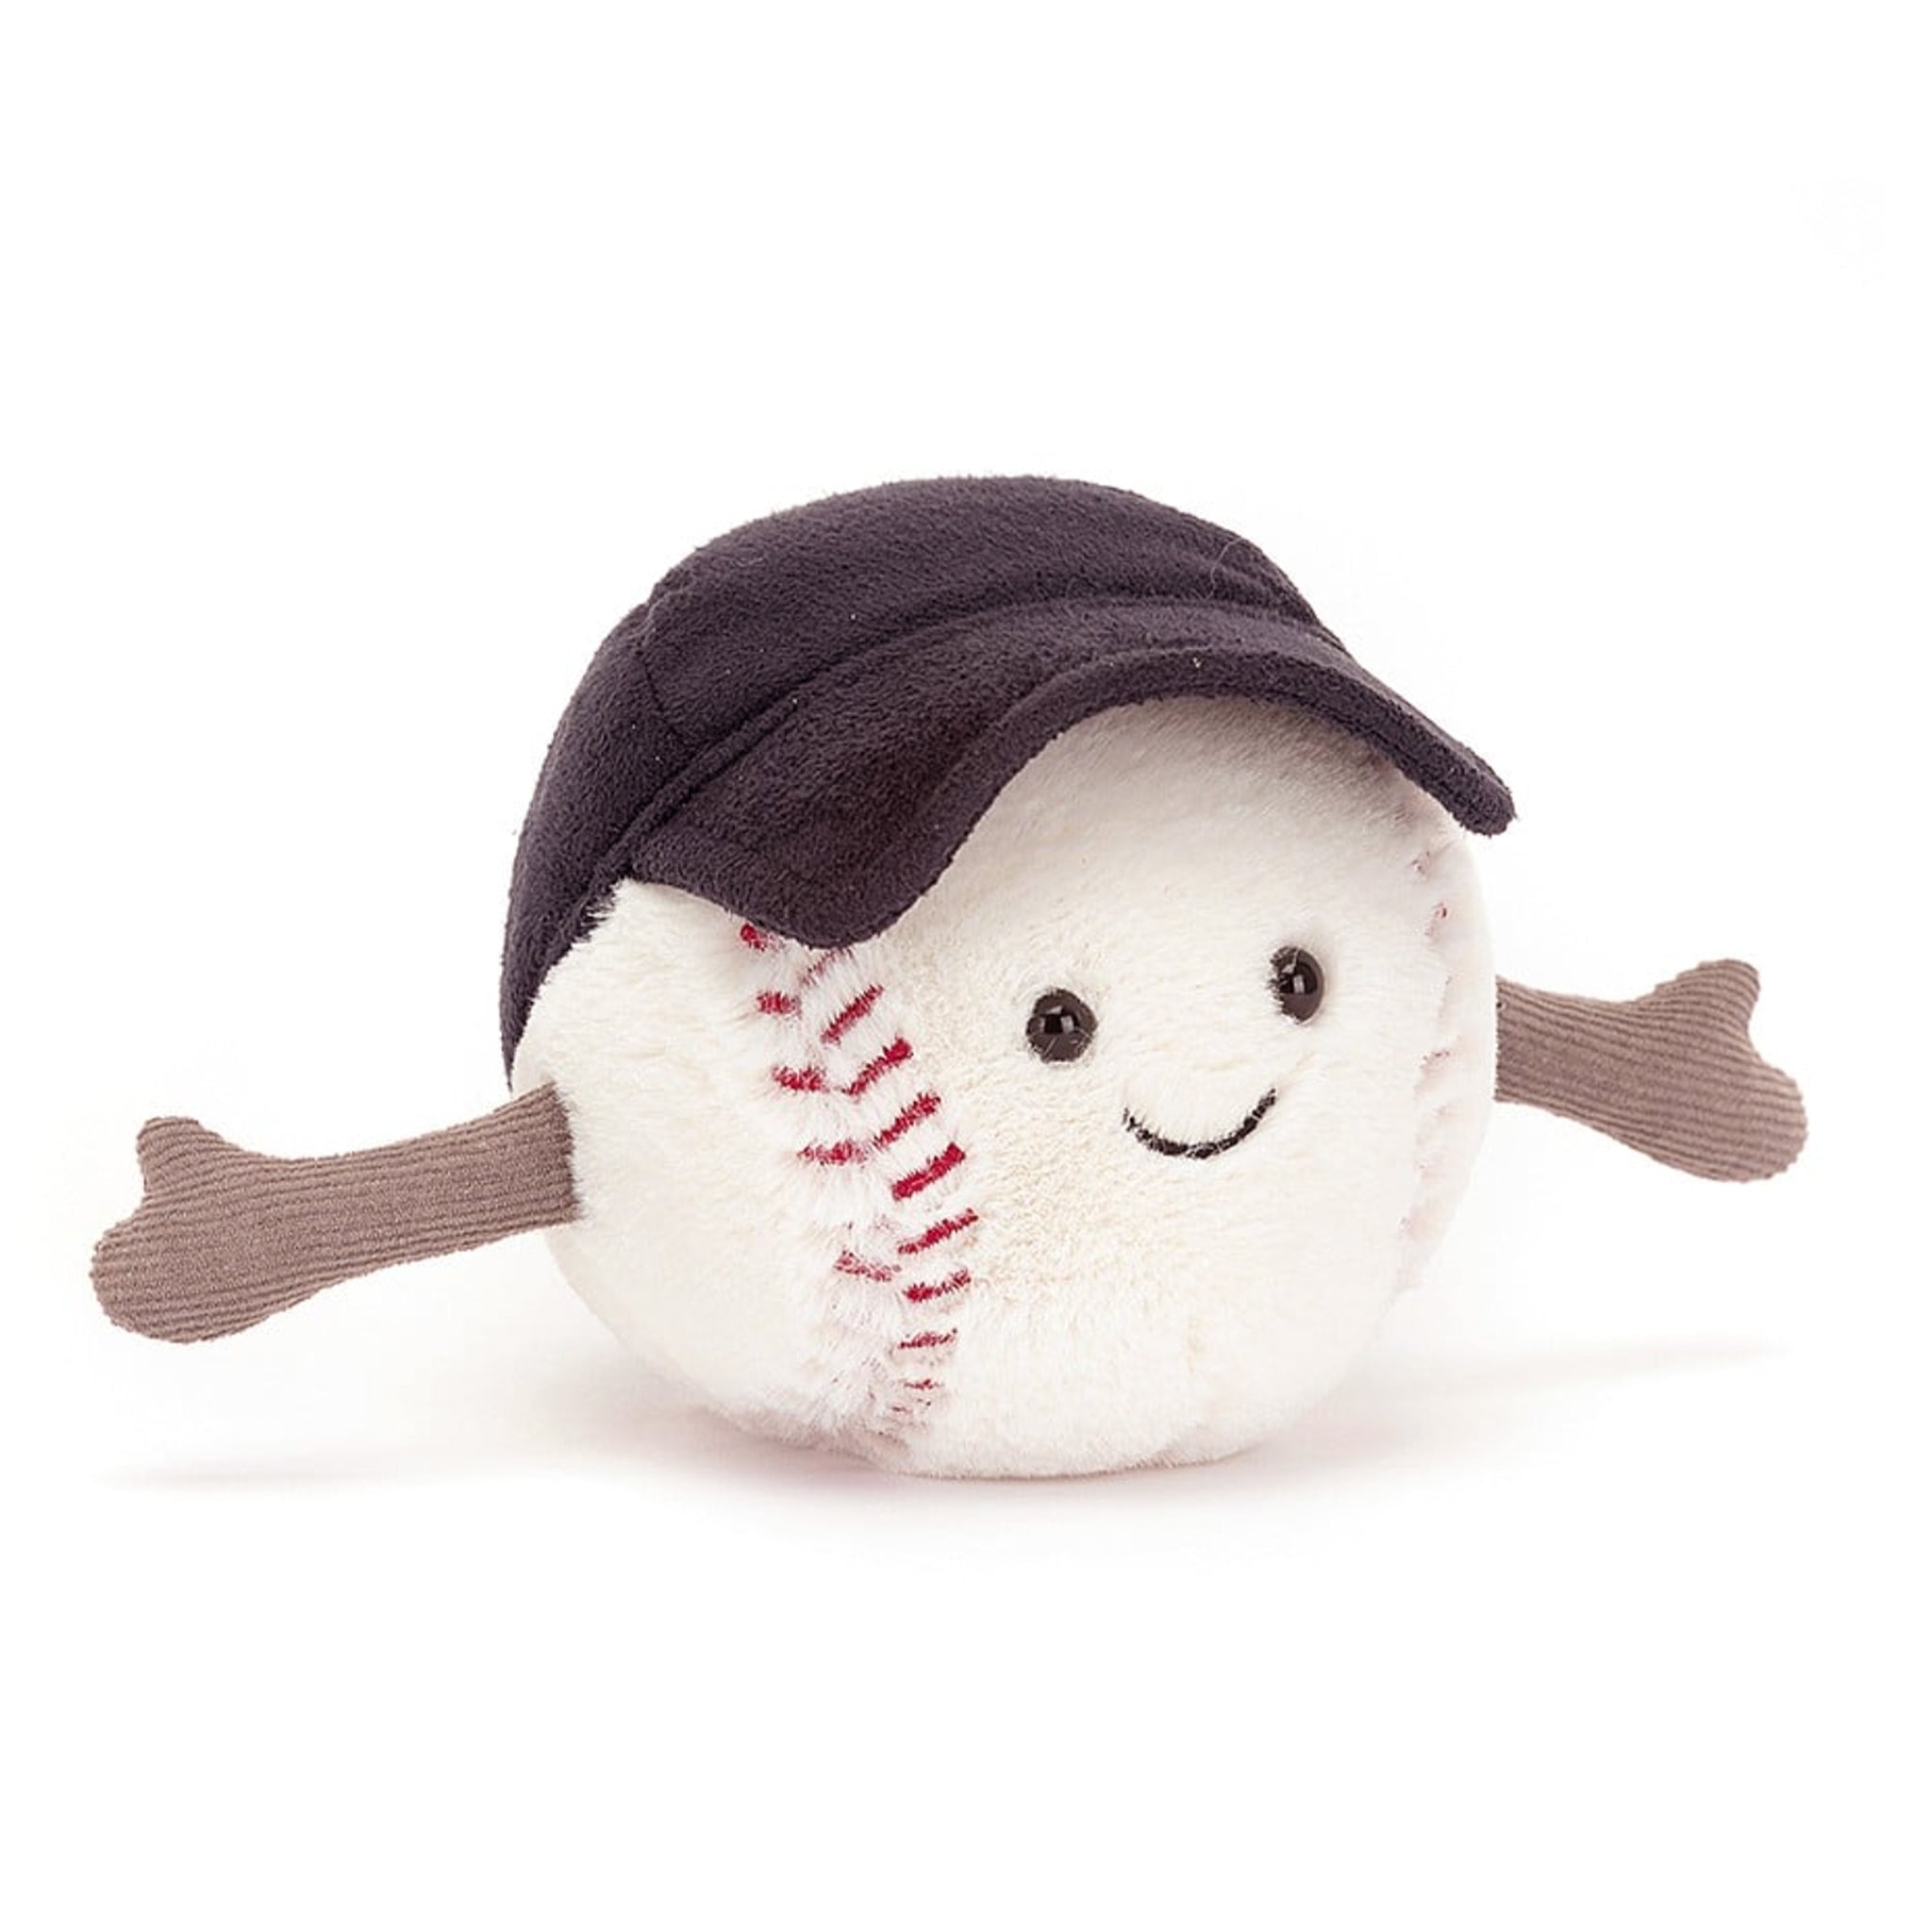 On a white background is a baseball shaped stuffed toy wearing a black baseball cap and a smiling face. 